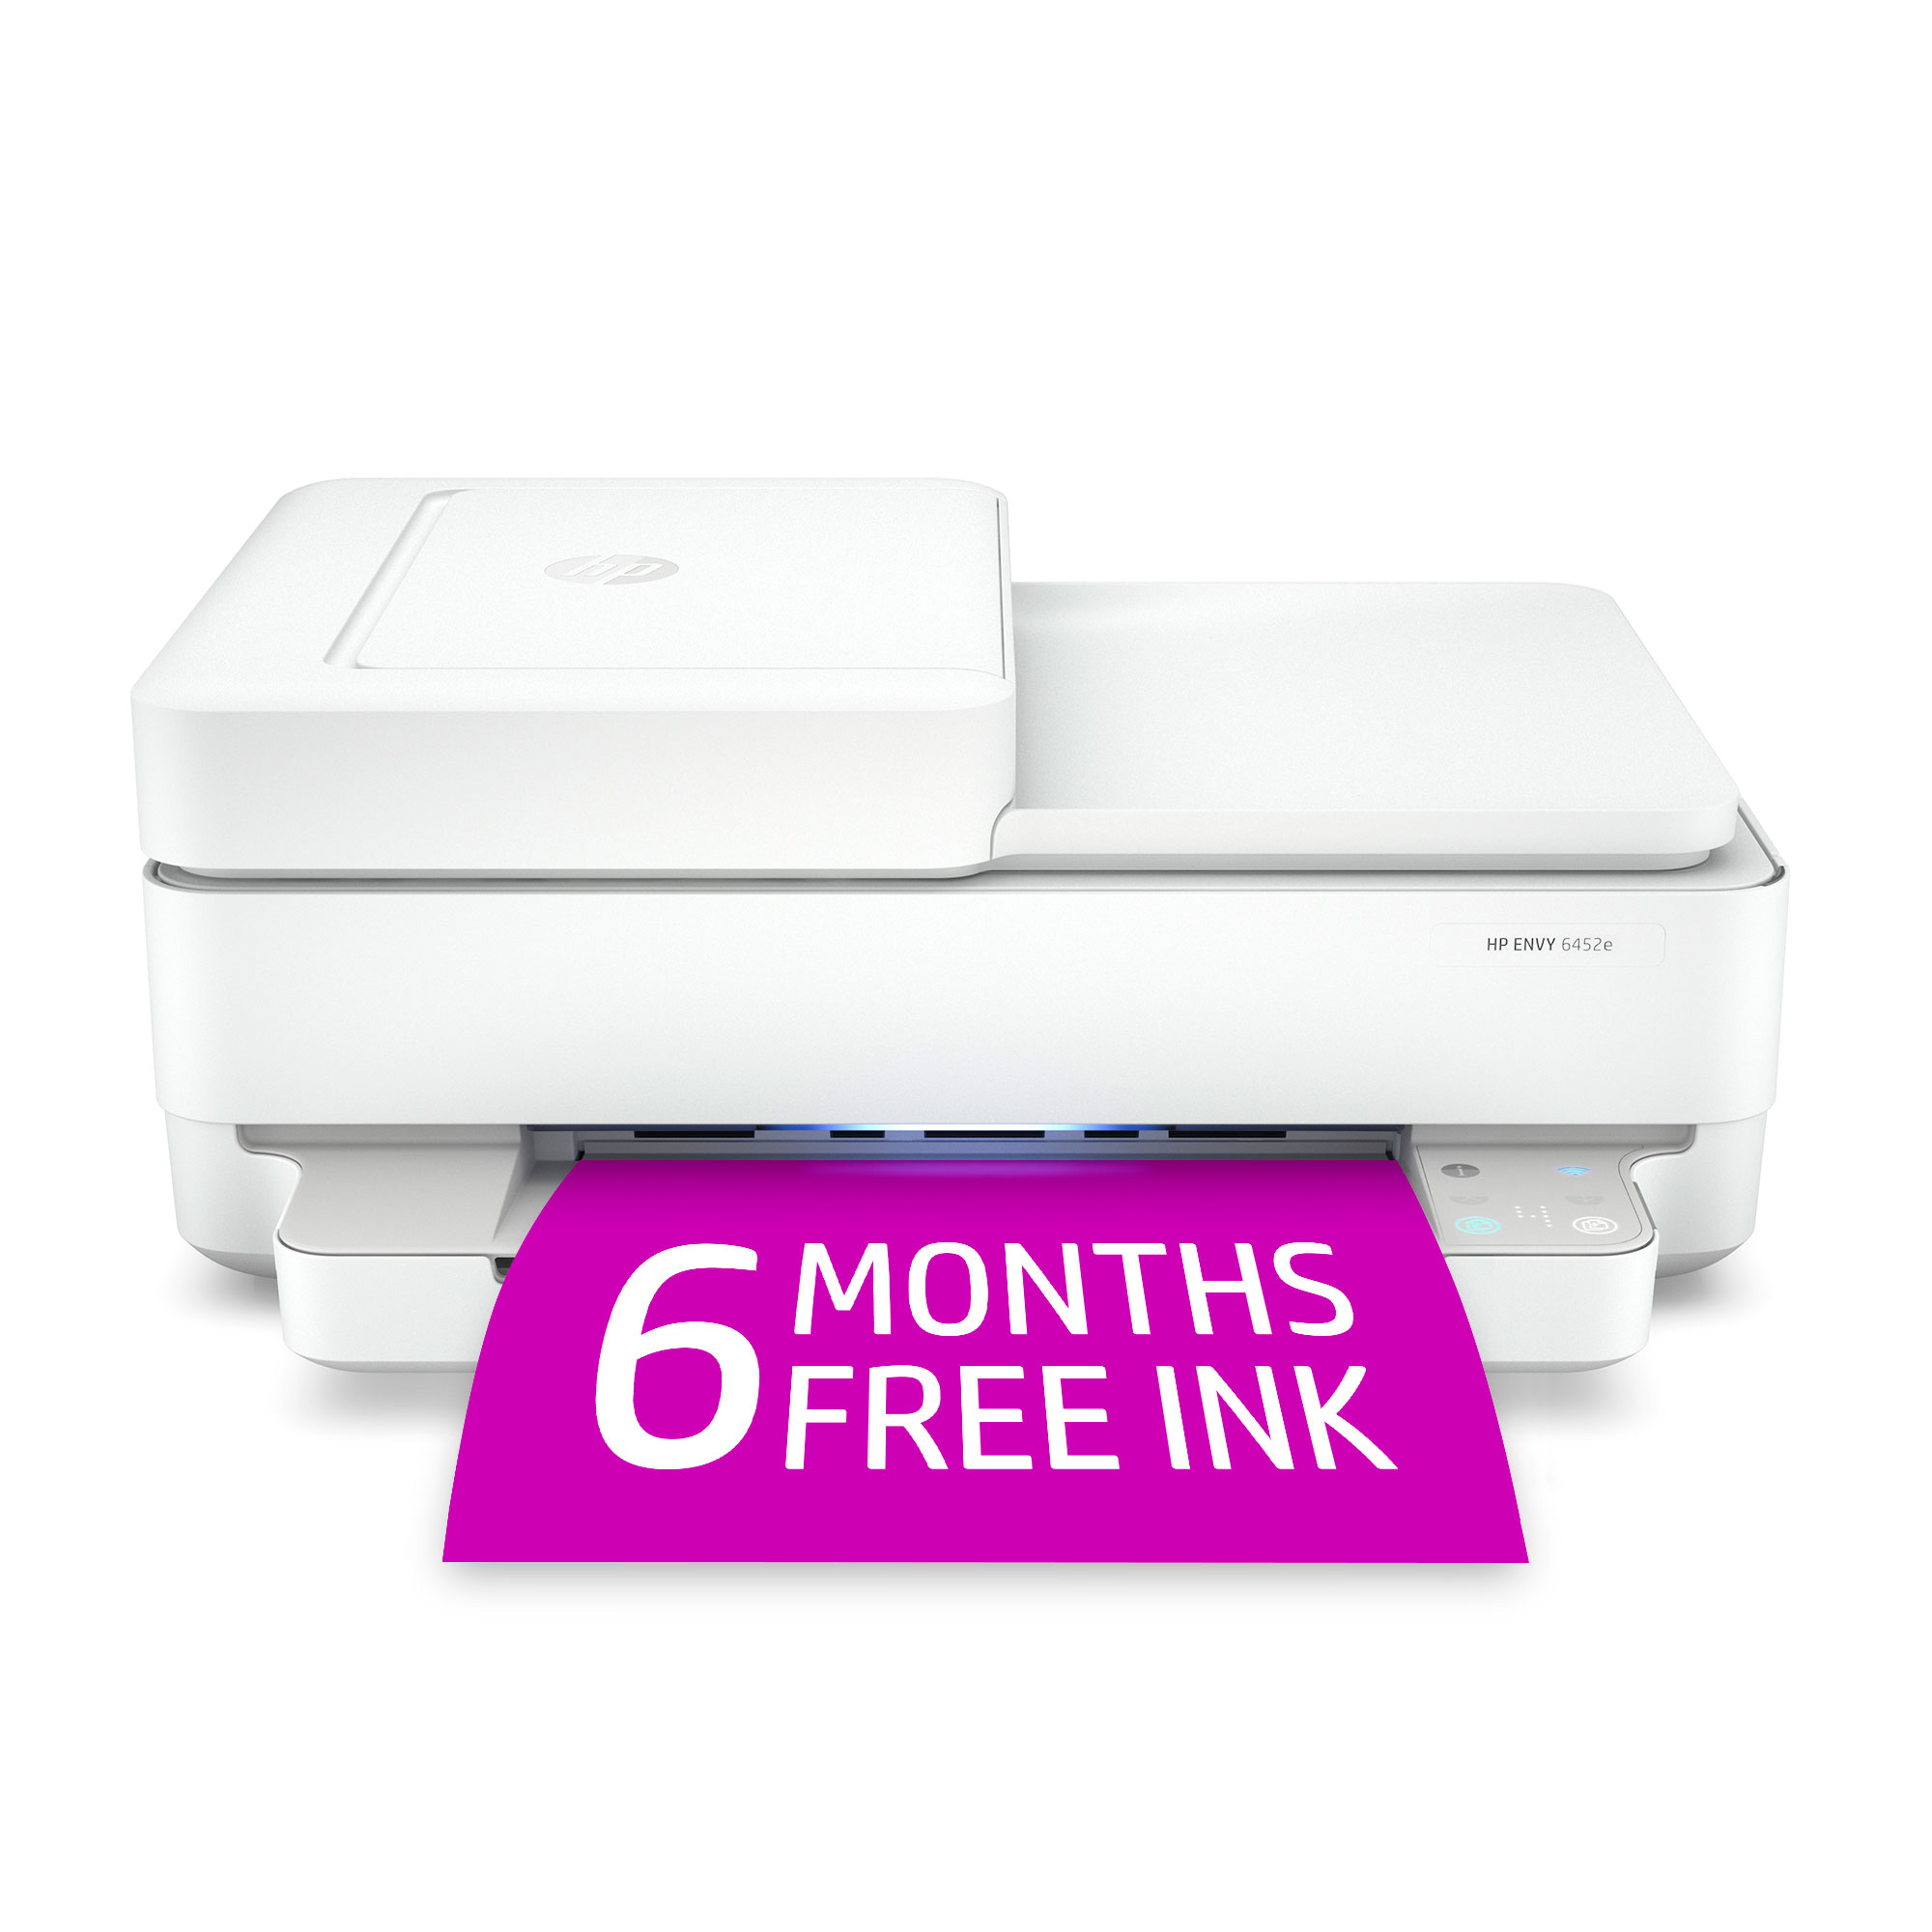 HP ENVY 6452e All-in-One Wireless Printer with 6 Months Instant Ink Included with Walmart.com